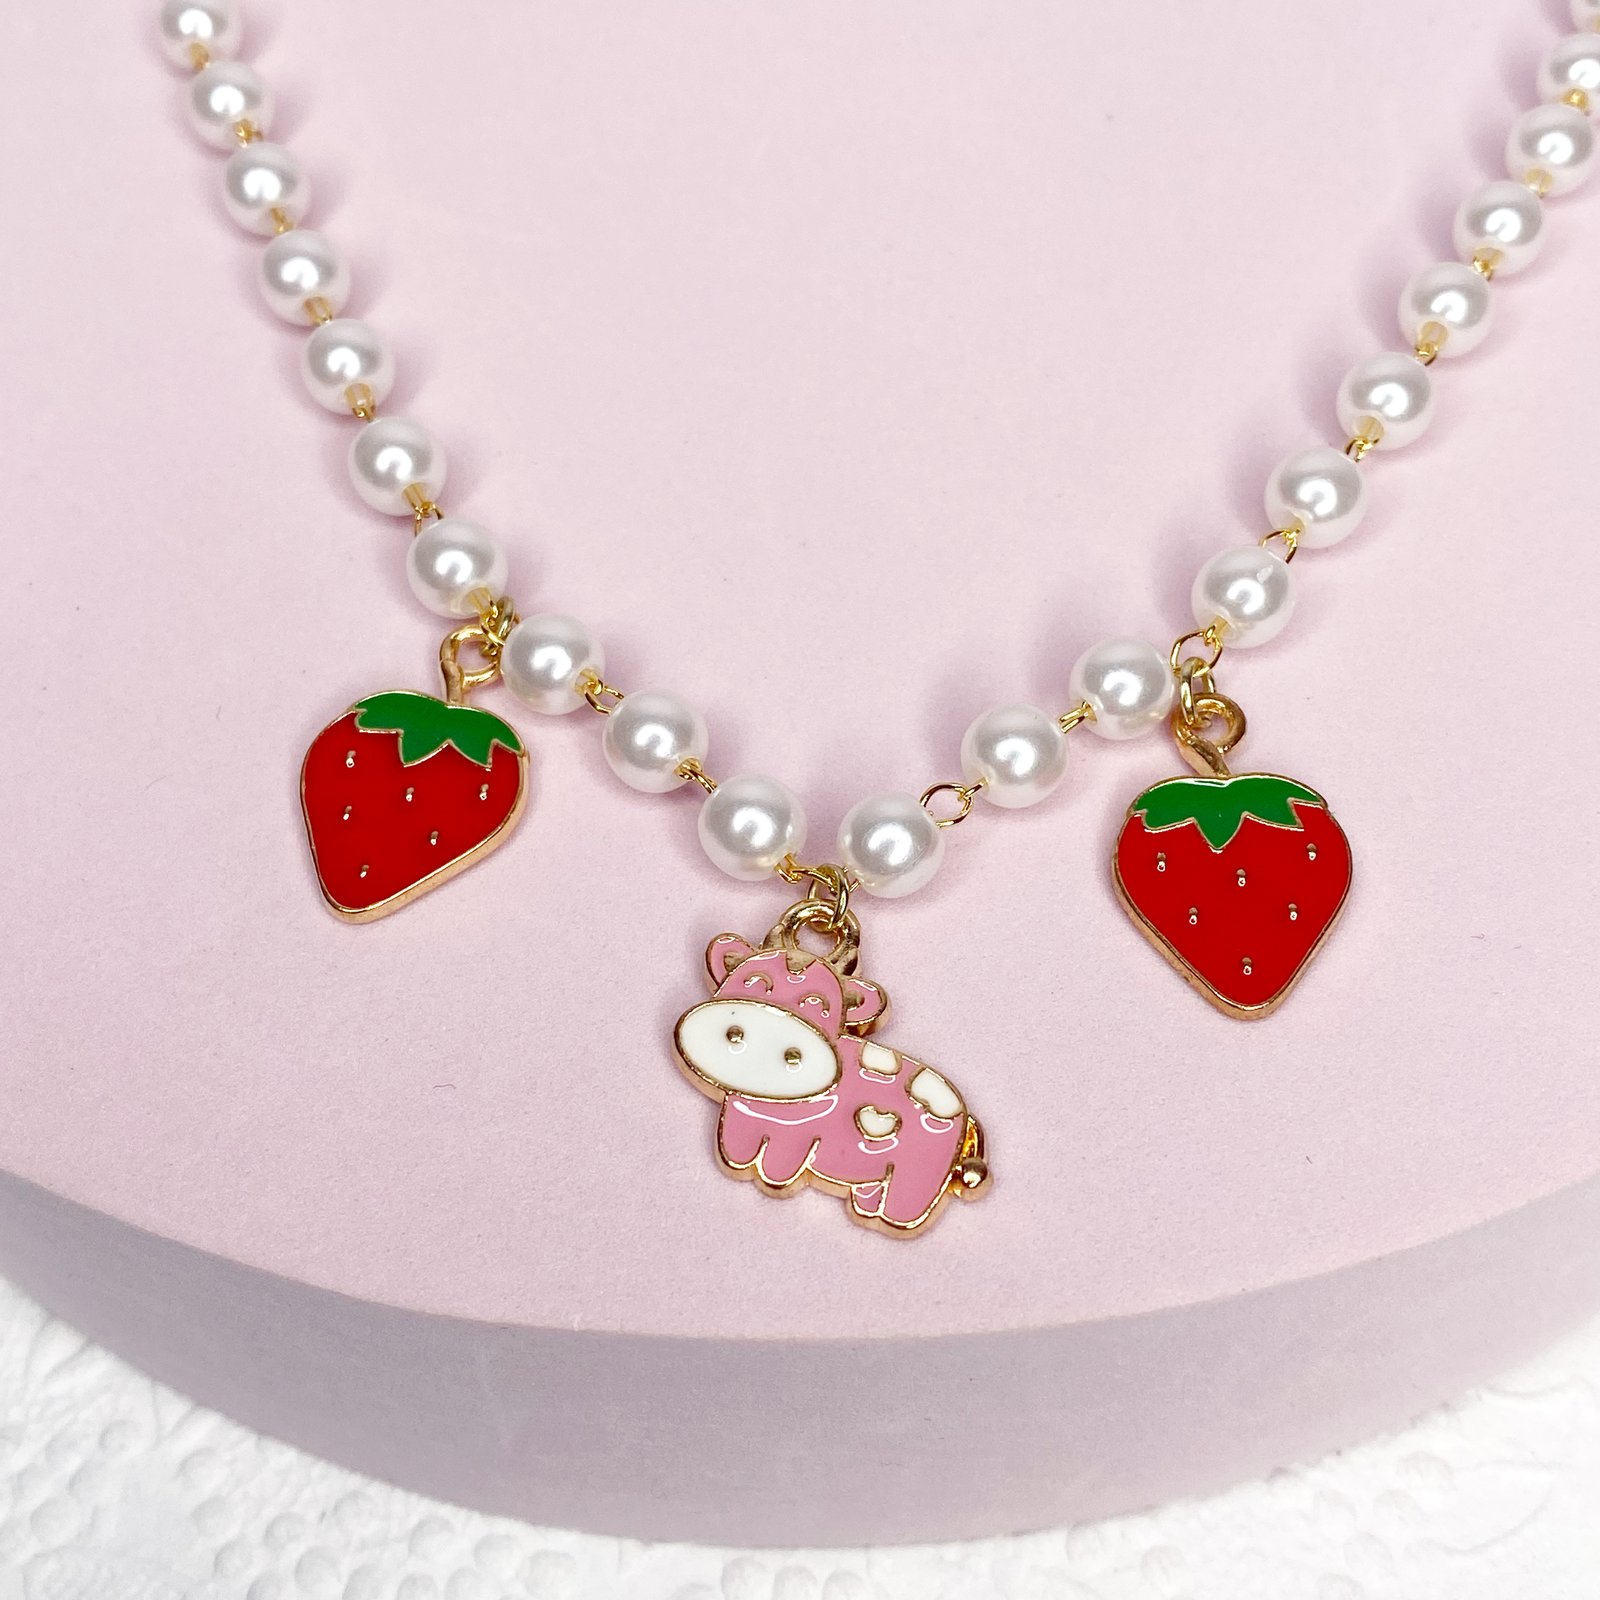 hiii! im looking for this necklace! willing to pay around $25 for it🫶! :  r/MelanieMartinez